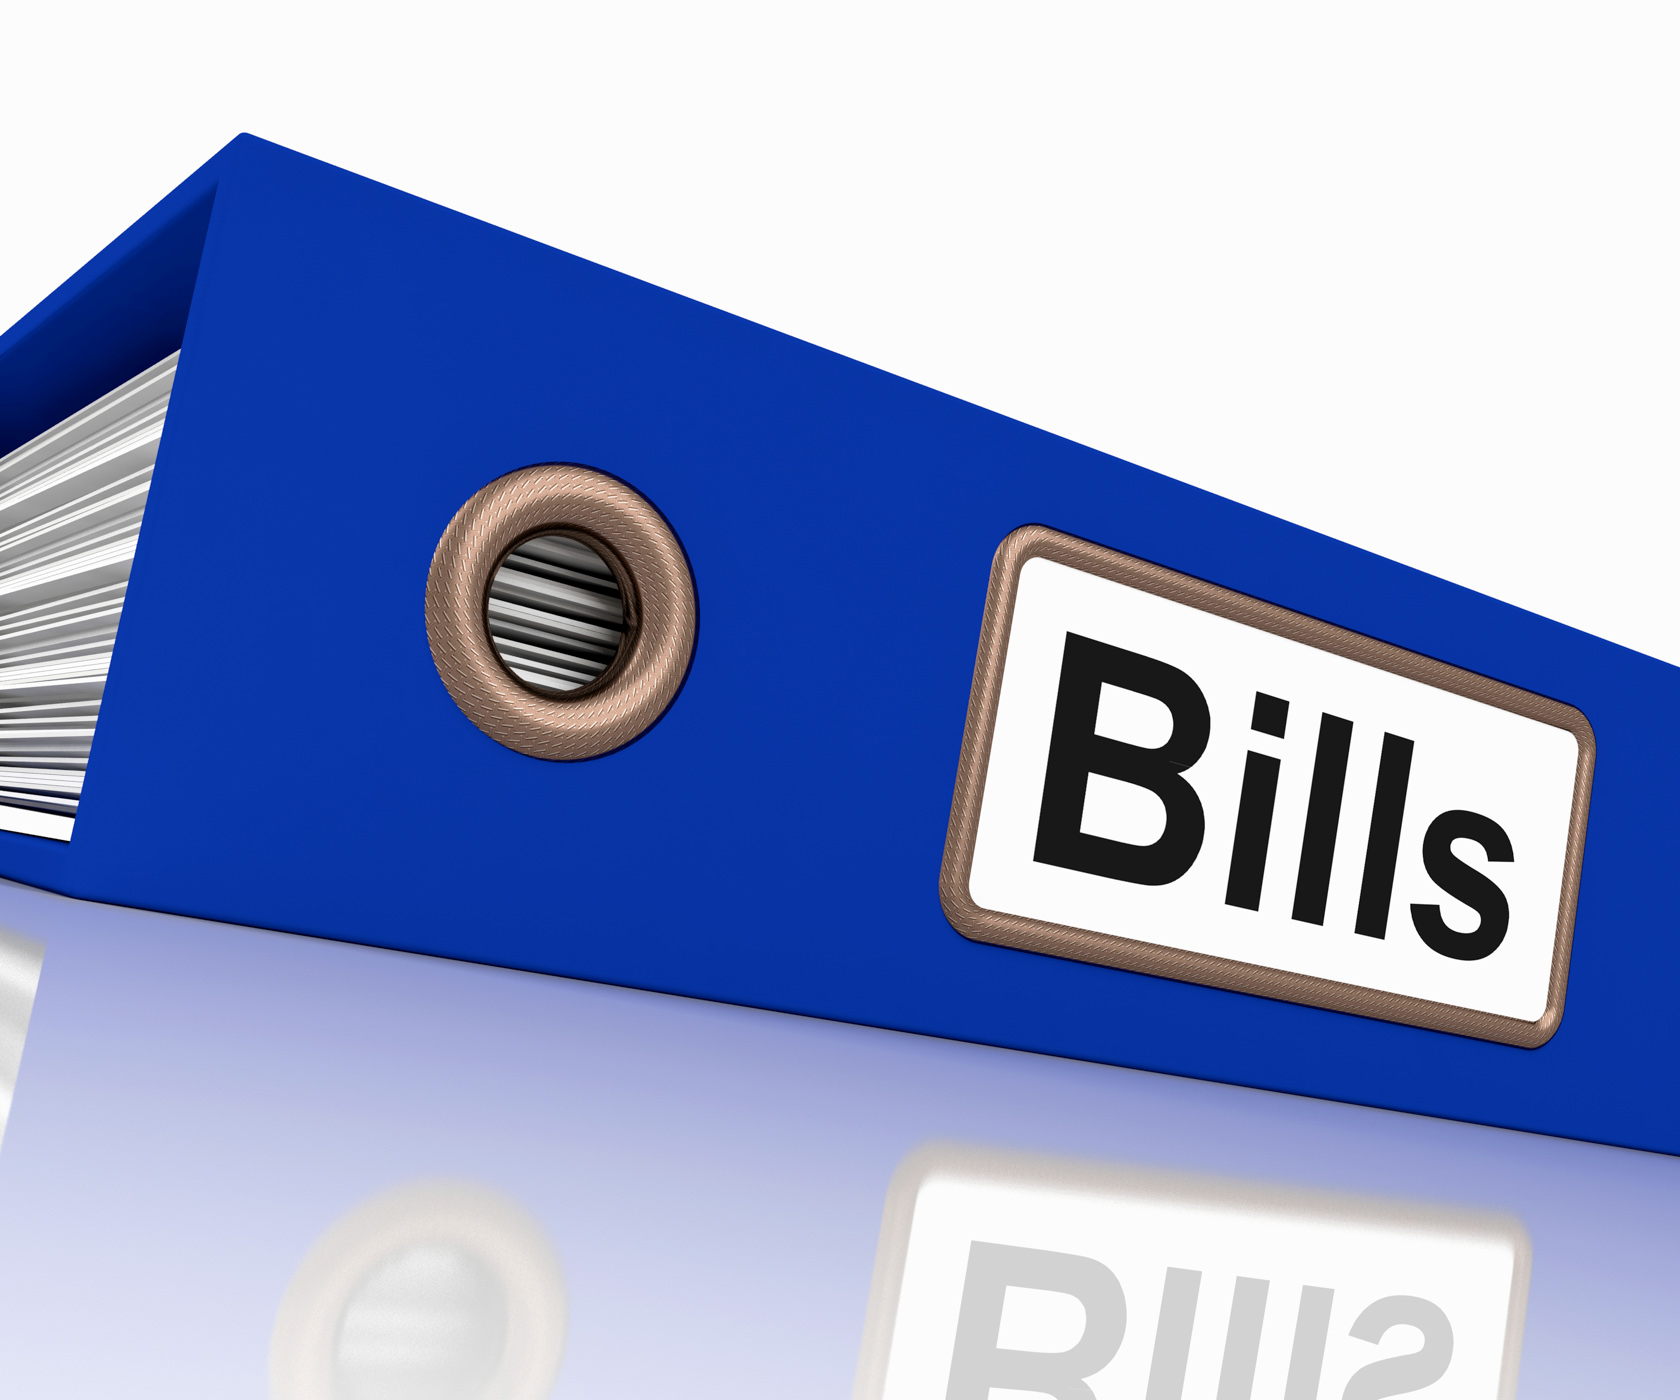 Bills File Shows Accounting And Payments Due, File, Payable, Invoices, Invoice, HQ Photo